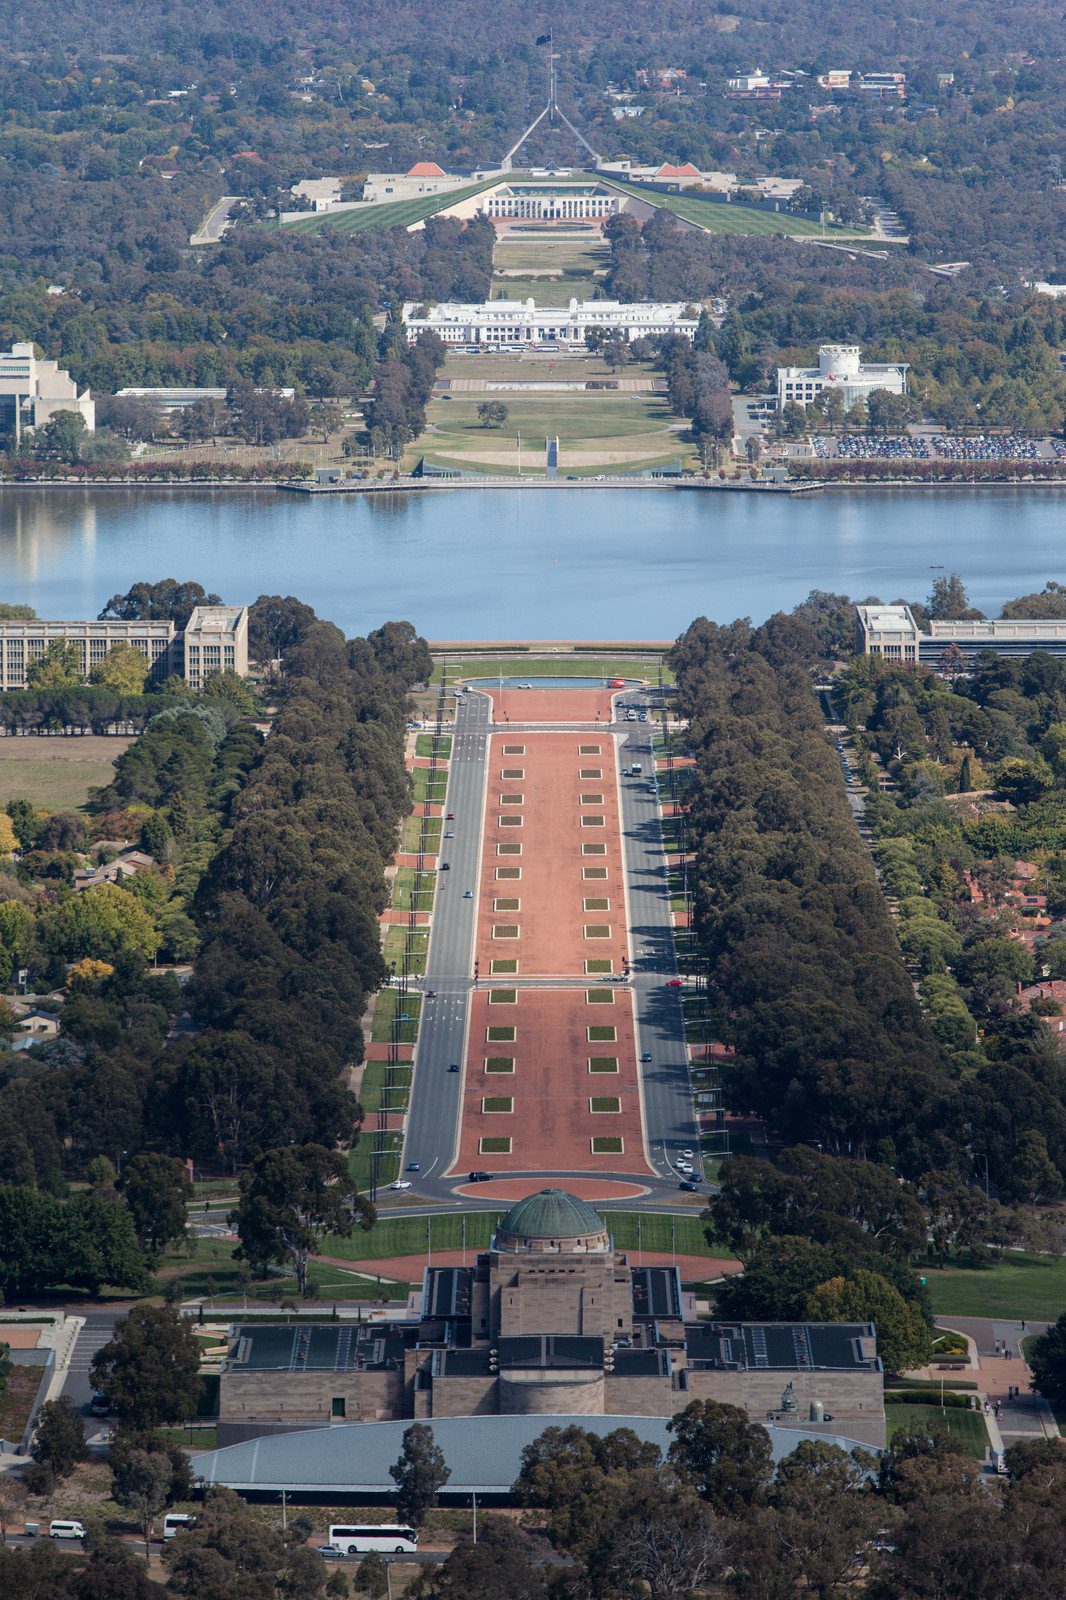 View from the Mt Ainslie Lookout over the Australian War Memorial, Anzac Parade, Lake Burley Griffin and Parliament House